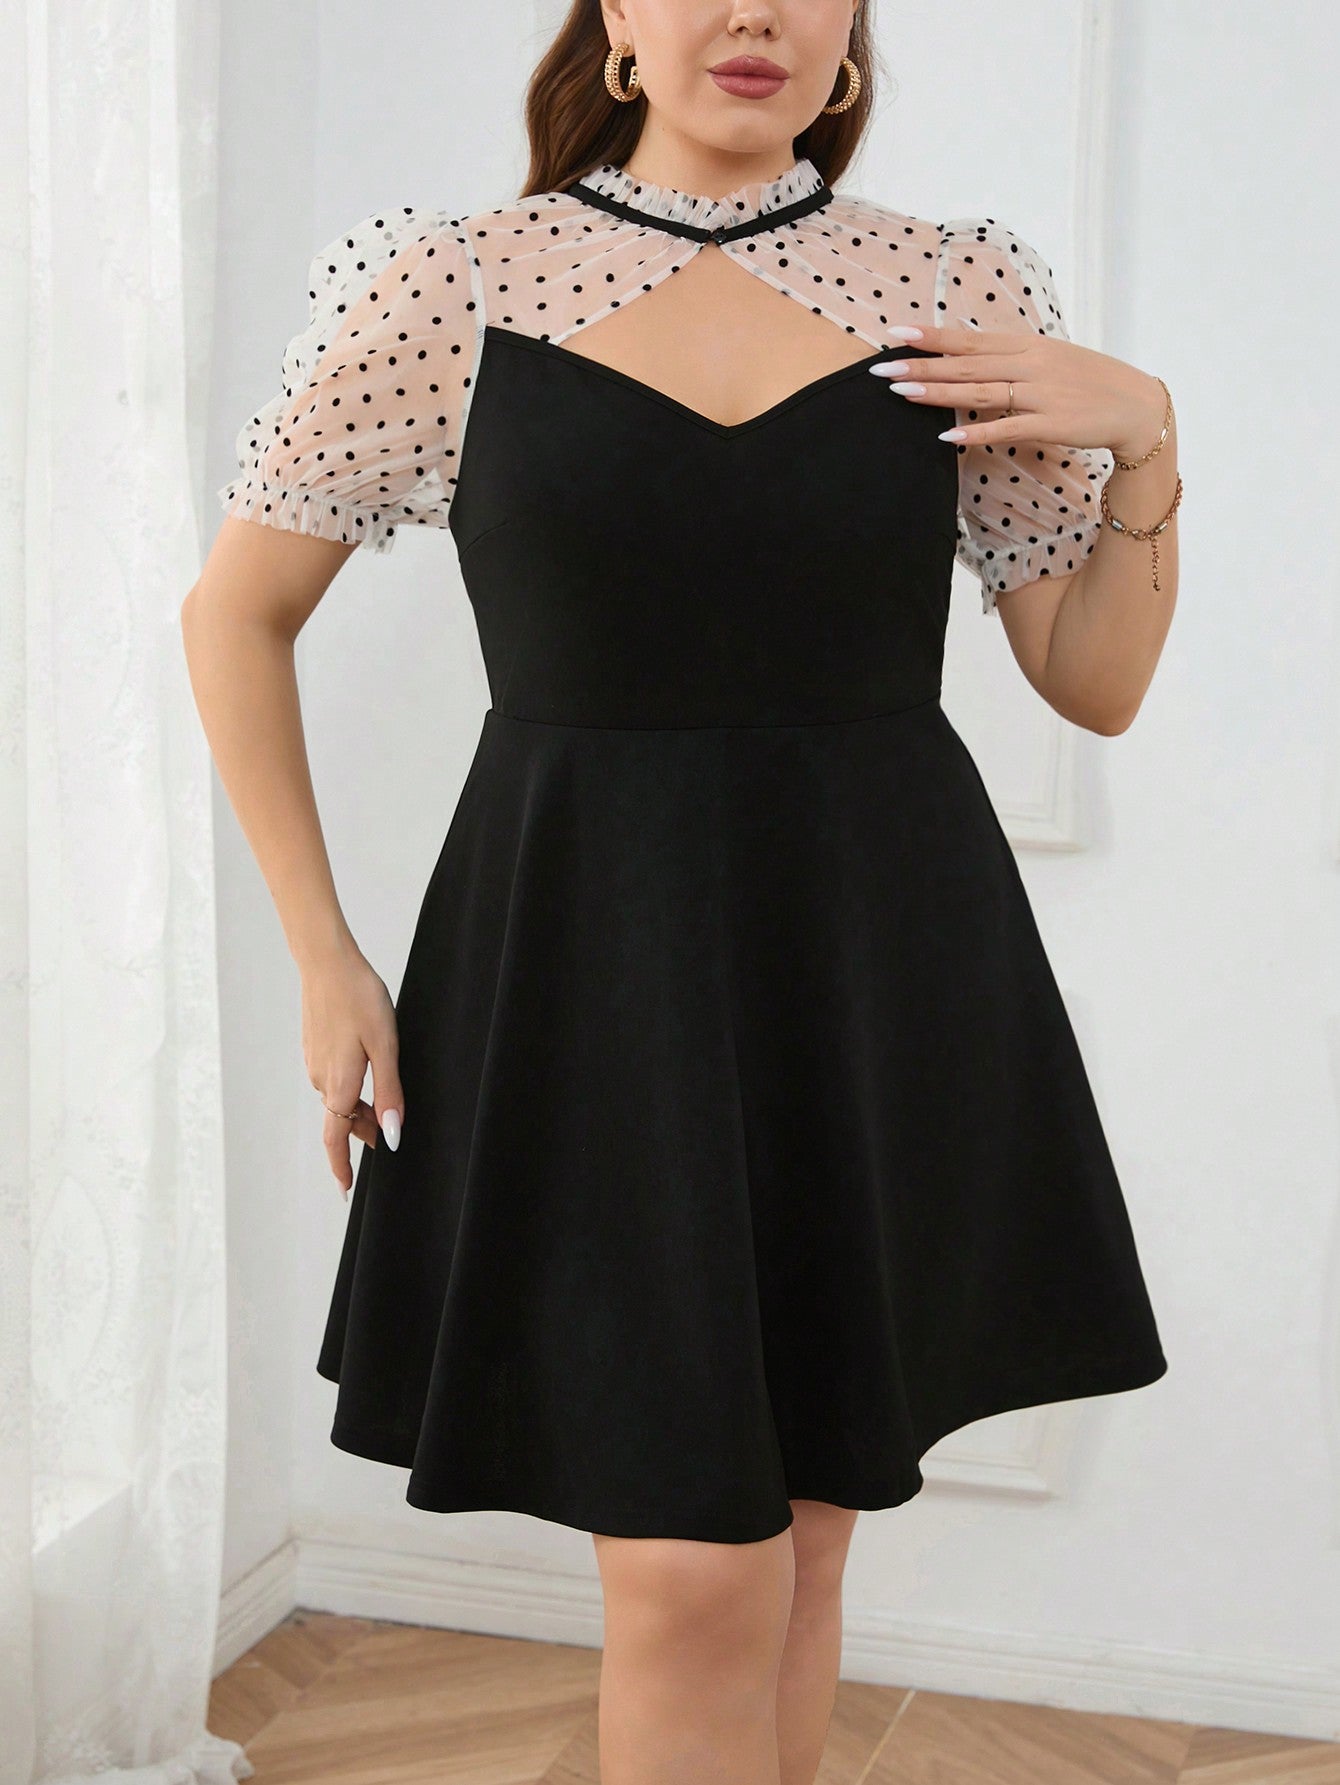 Privé Plus Size Women's Color Block Polka Dot Mesh Spliced Bubble Sleeve Hollow Out Dress, Suitable For Romantic Dates, Dinners, Daily Outings And Street Snap